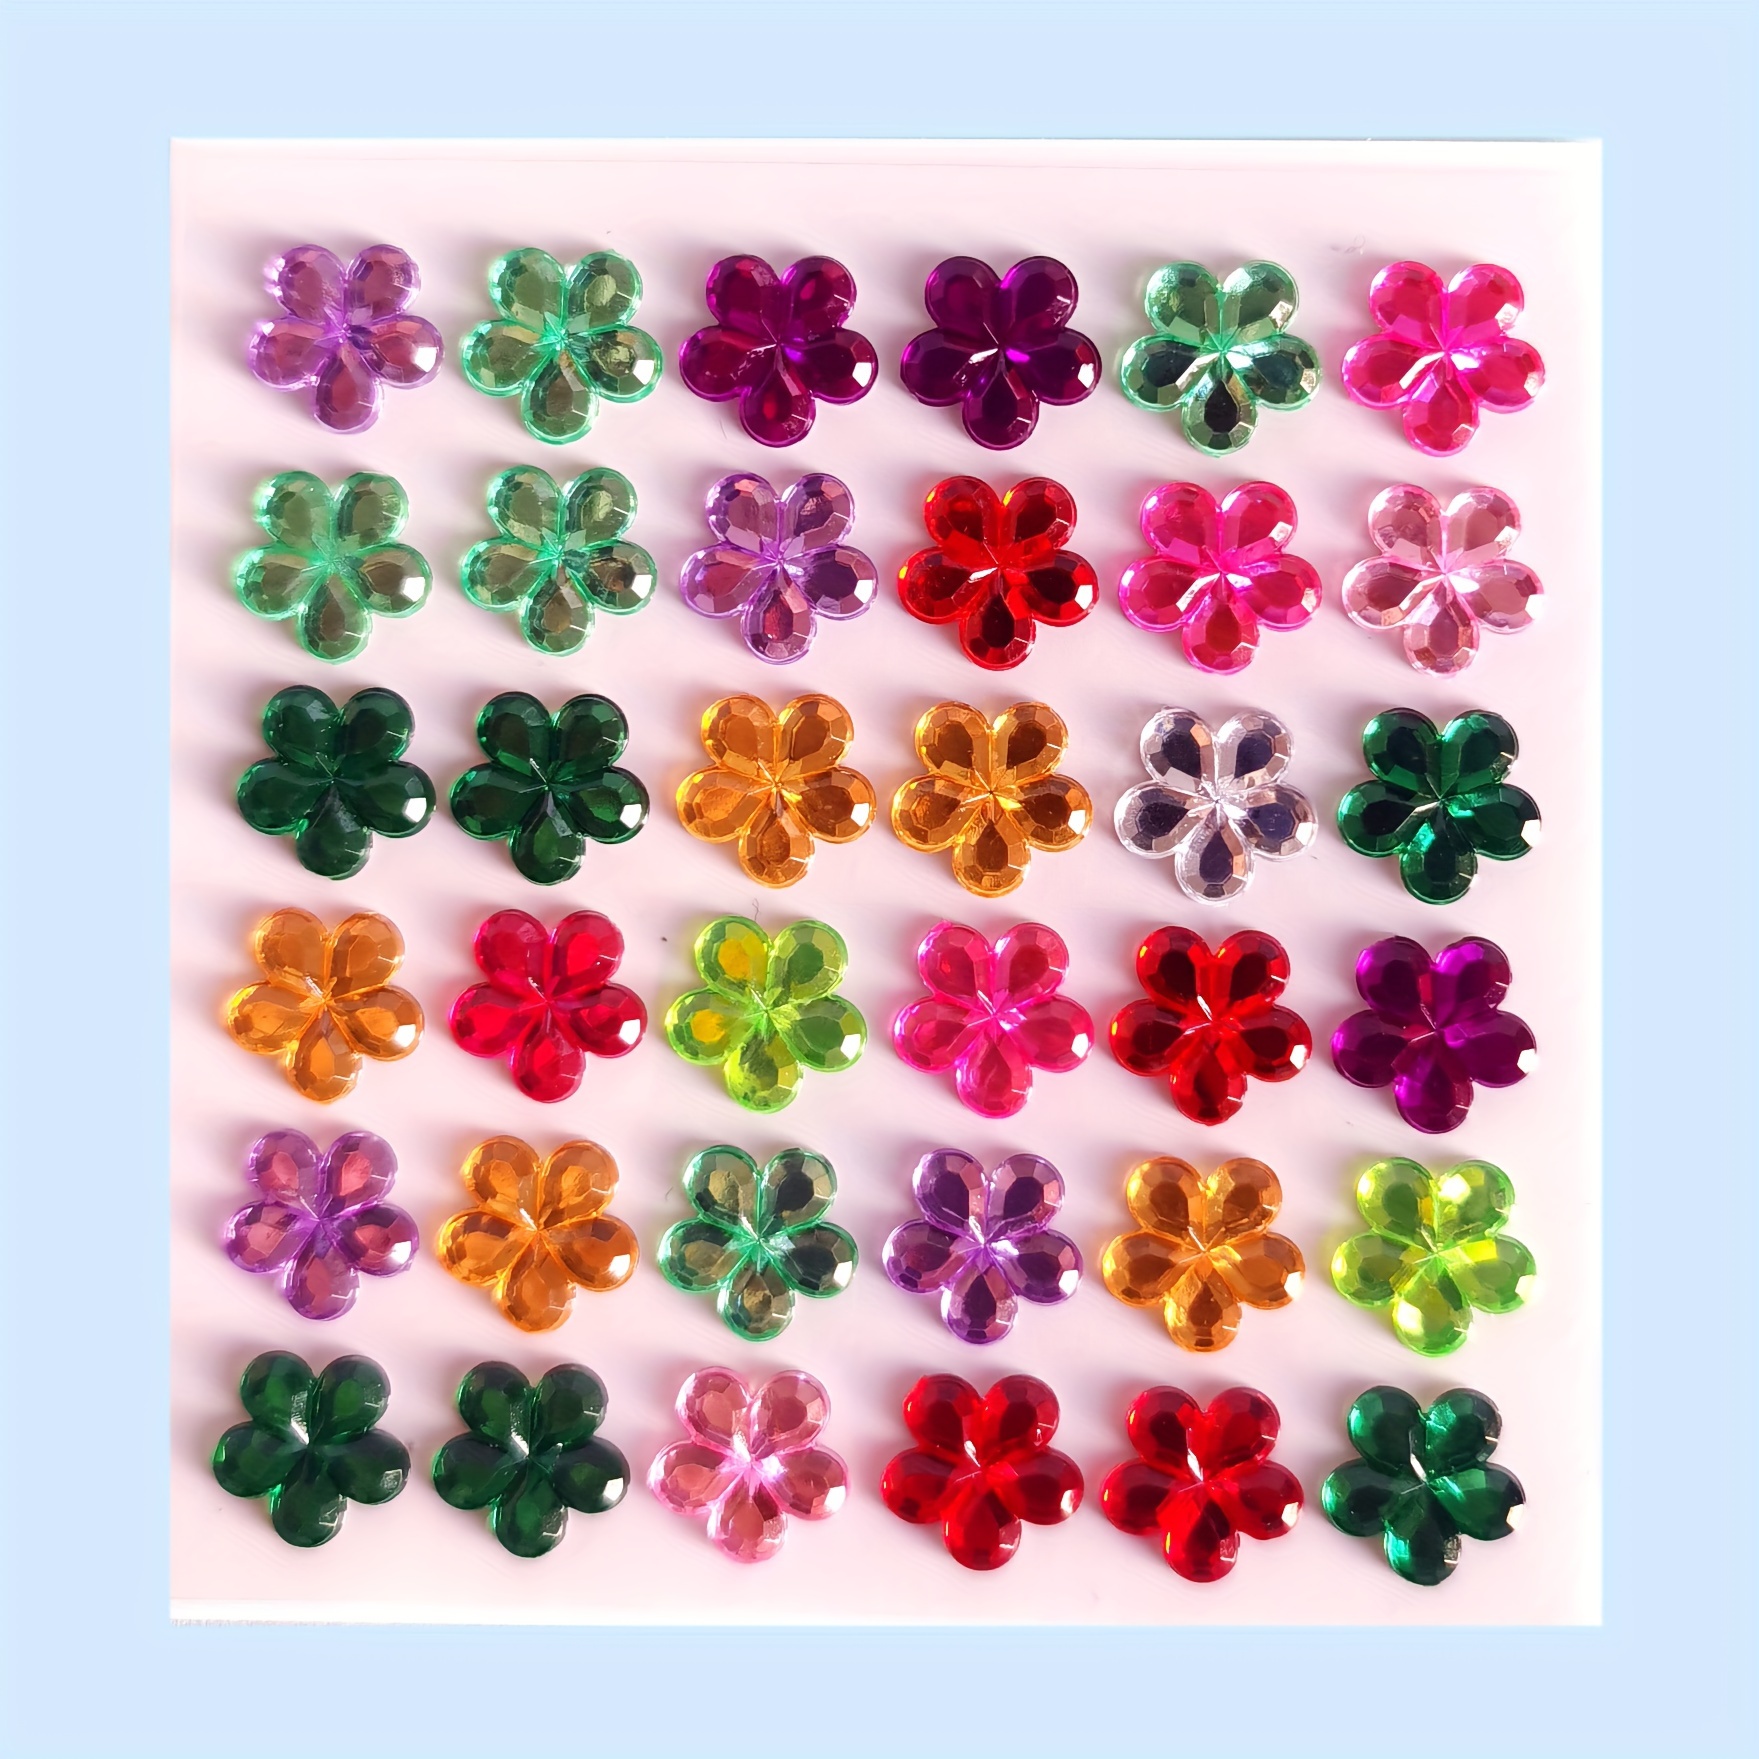 

Colorful Flower-shaped Self-adhesive Decorative Gem Stickers, Can Be Used On Face, Hair, Forehead, Nails, Cards, Gift Packaging